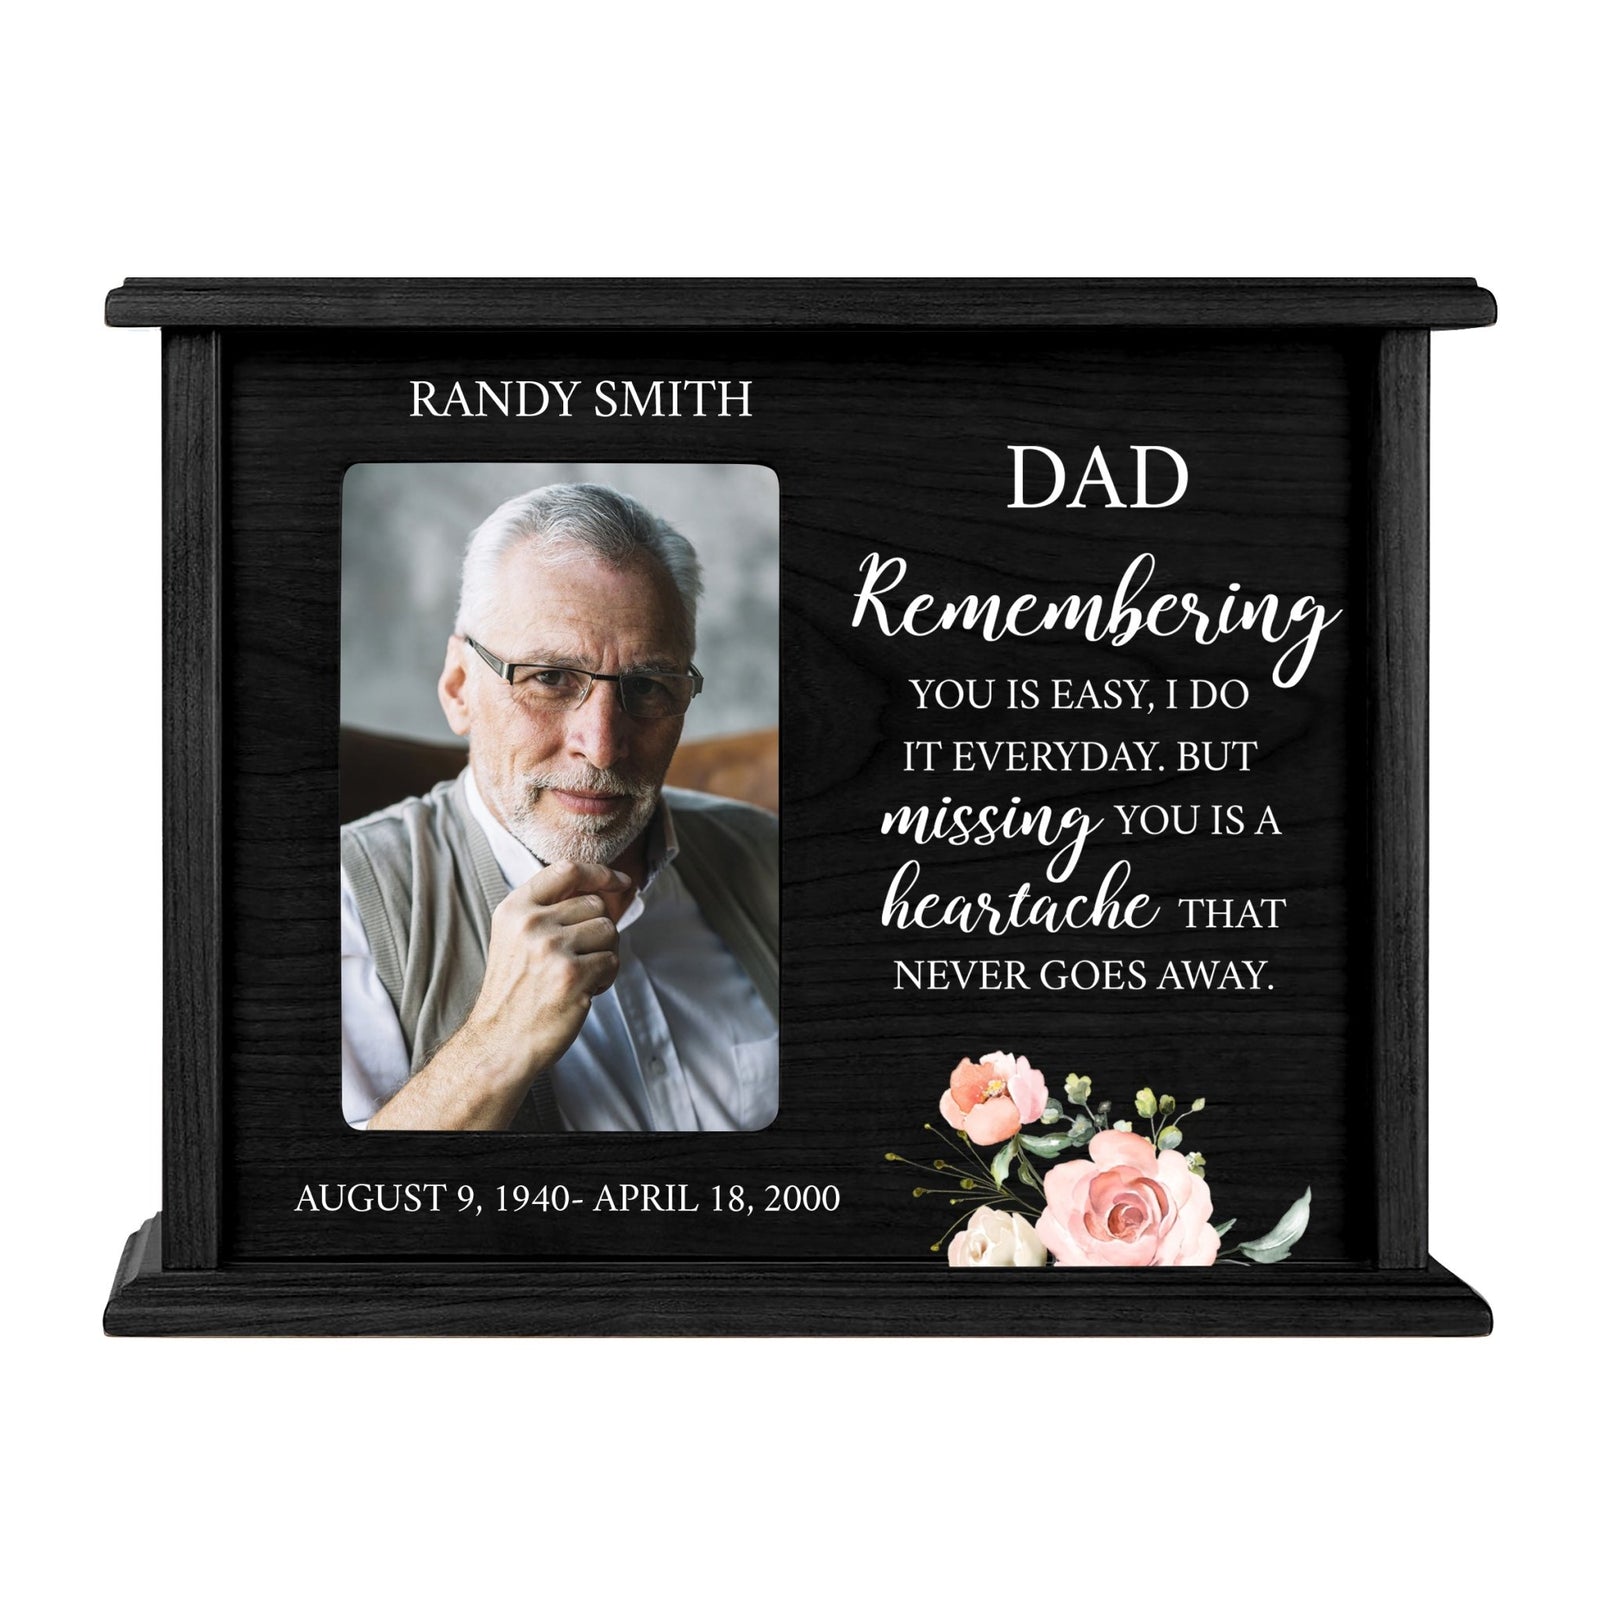 Personalized Memorial Cherry Wood 12 x 4.5 x 9 Cremation Urn Box with Picture Frame holds 200 cu in of Human Ashes and 4x6 Photo - Remembering You Is Easy (Black) - LifeSong Milestones